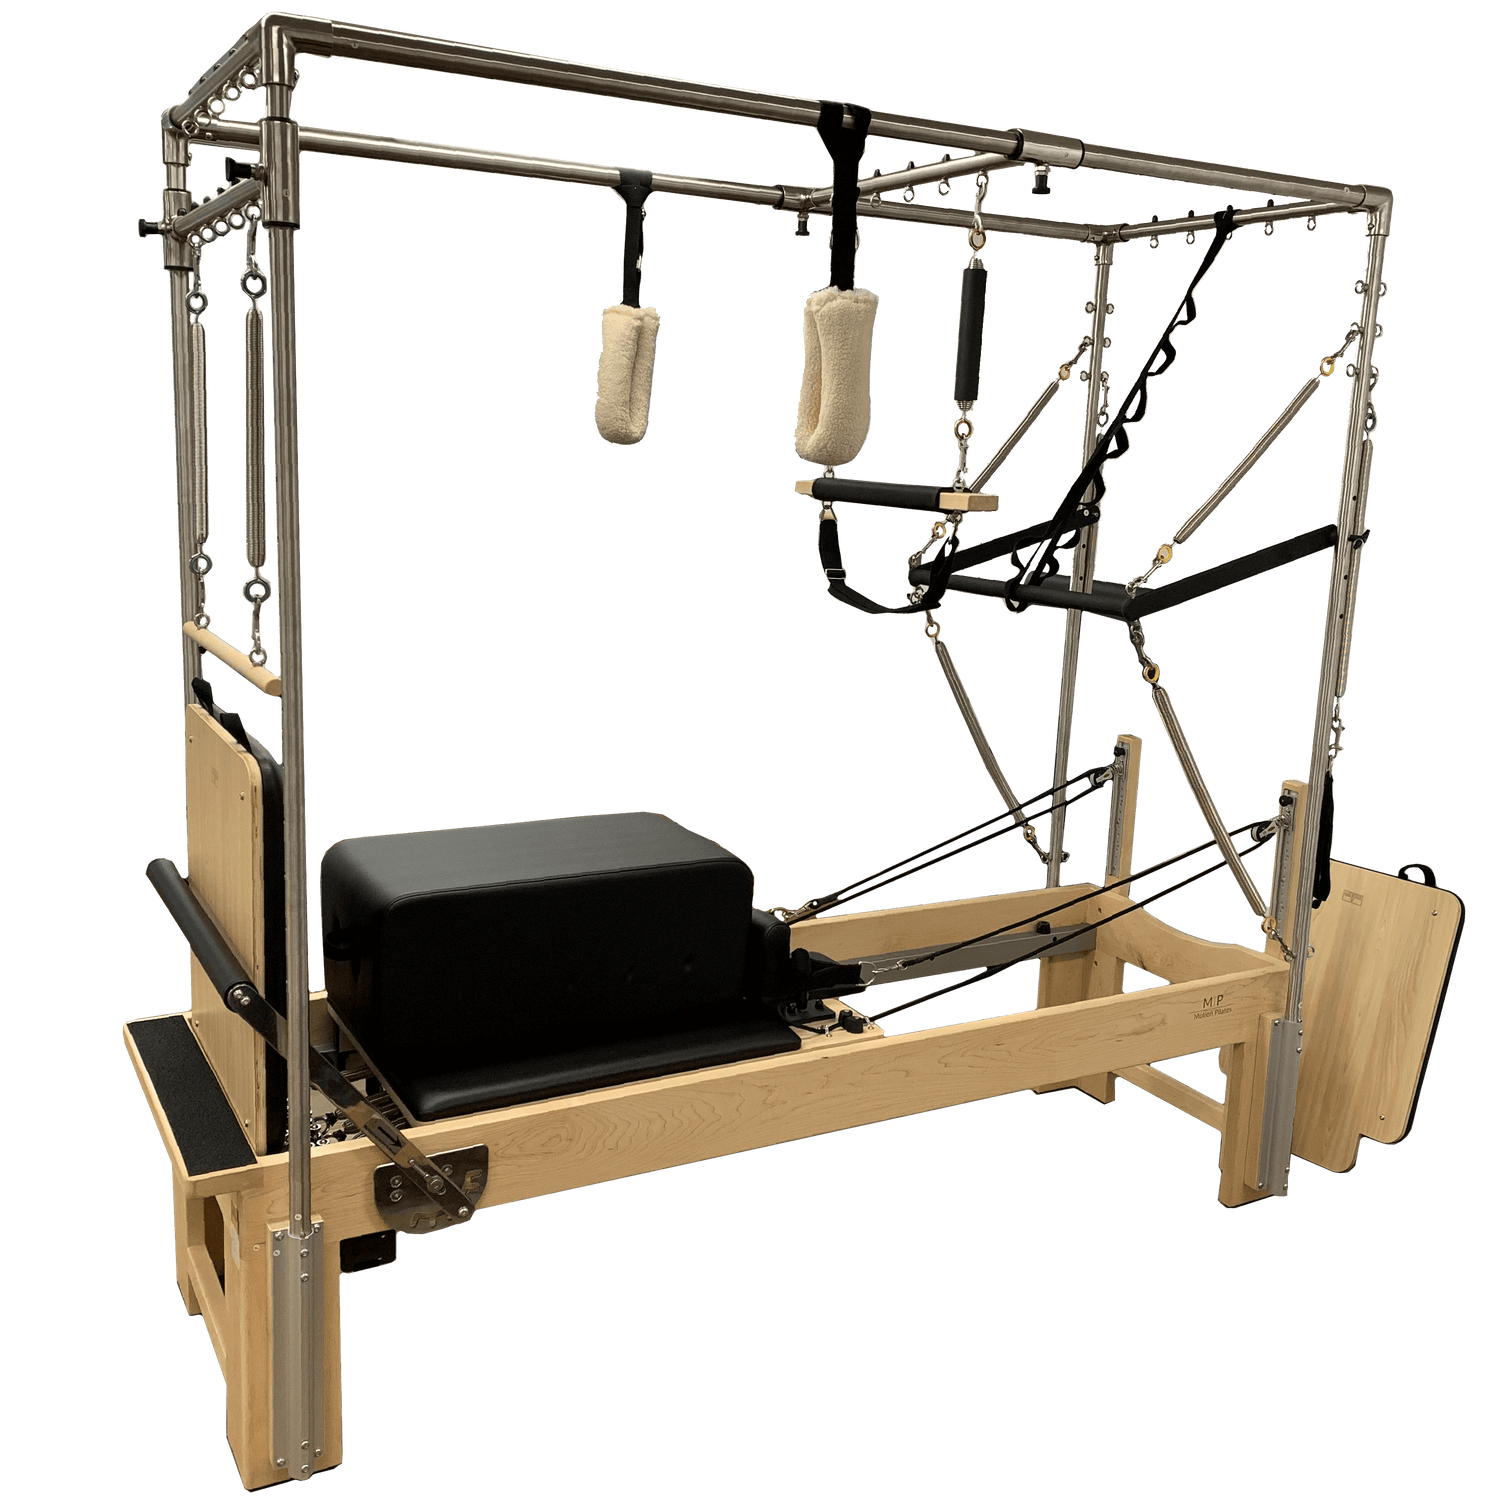 Buy Trapeze Pilates Reformers Online - Motion Pilates Full Trapeze